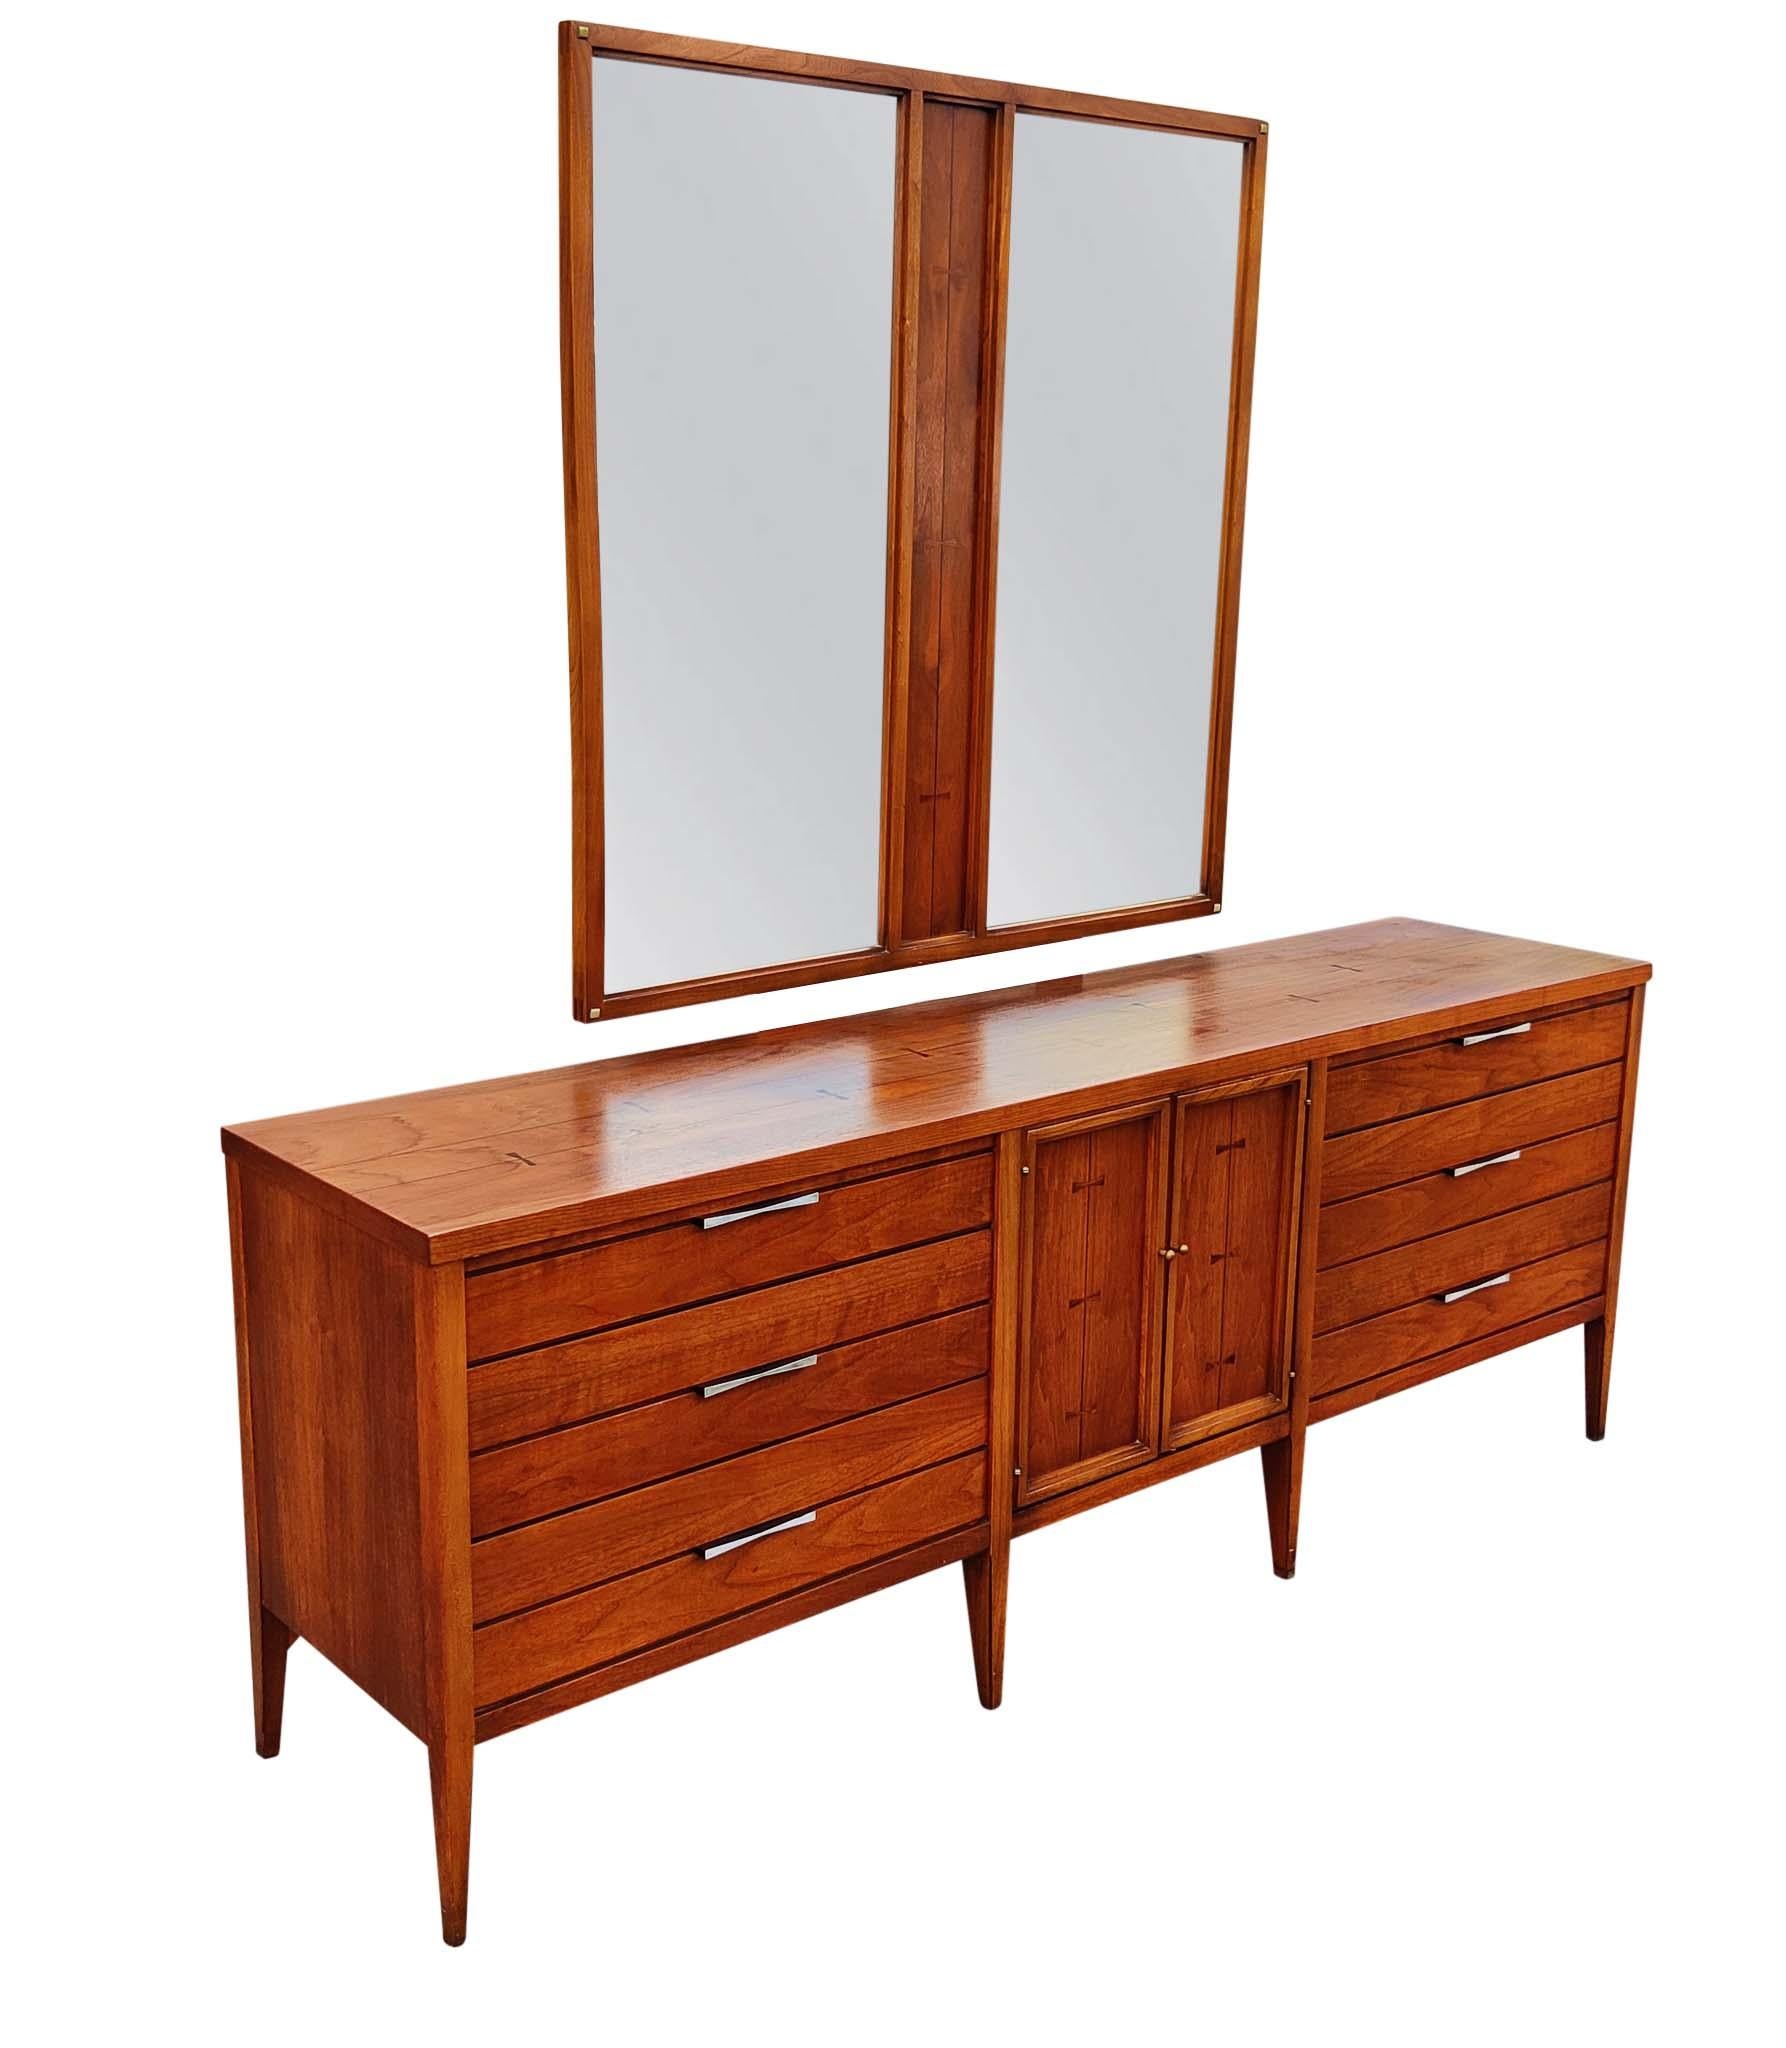 Please note that I have the entire bedroom set at this time - See last picture. Long Dresser with Mirror. Tall Dresser.  Pair Nightstands. Group Discount Available. 

Large, exceptional Mid-Century Modern walnut & rosewood dresser manufactured in